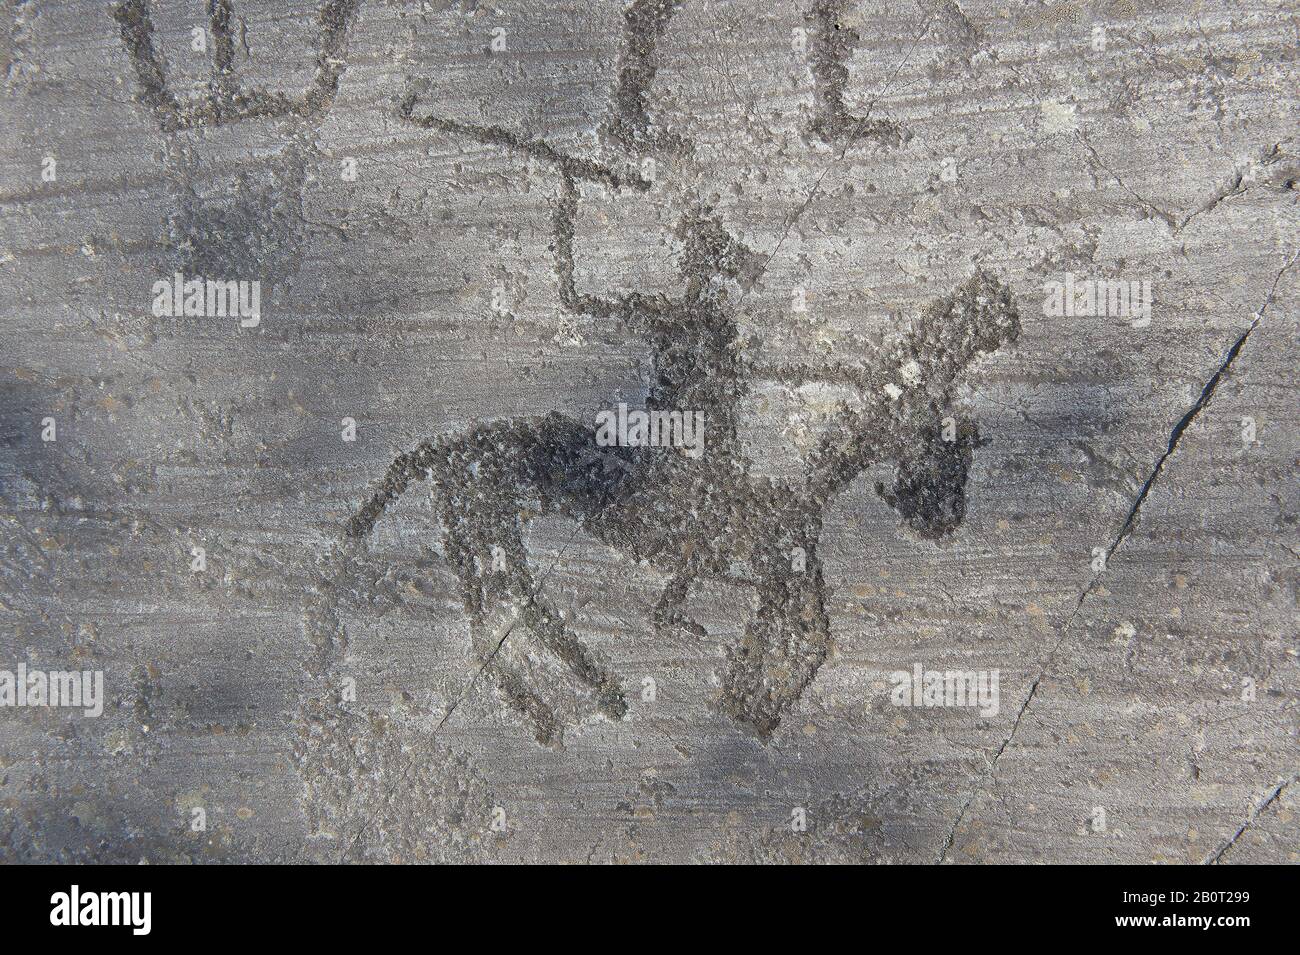 Petroglyph, rock carving, of a warrior on horseback with a quadrangle ax and shiled carved by the ancient Camuni people in the iron age between  900-1 Stock Photo